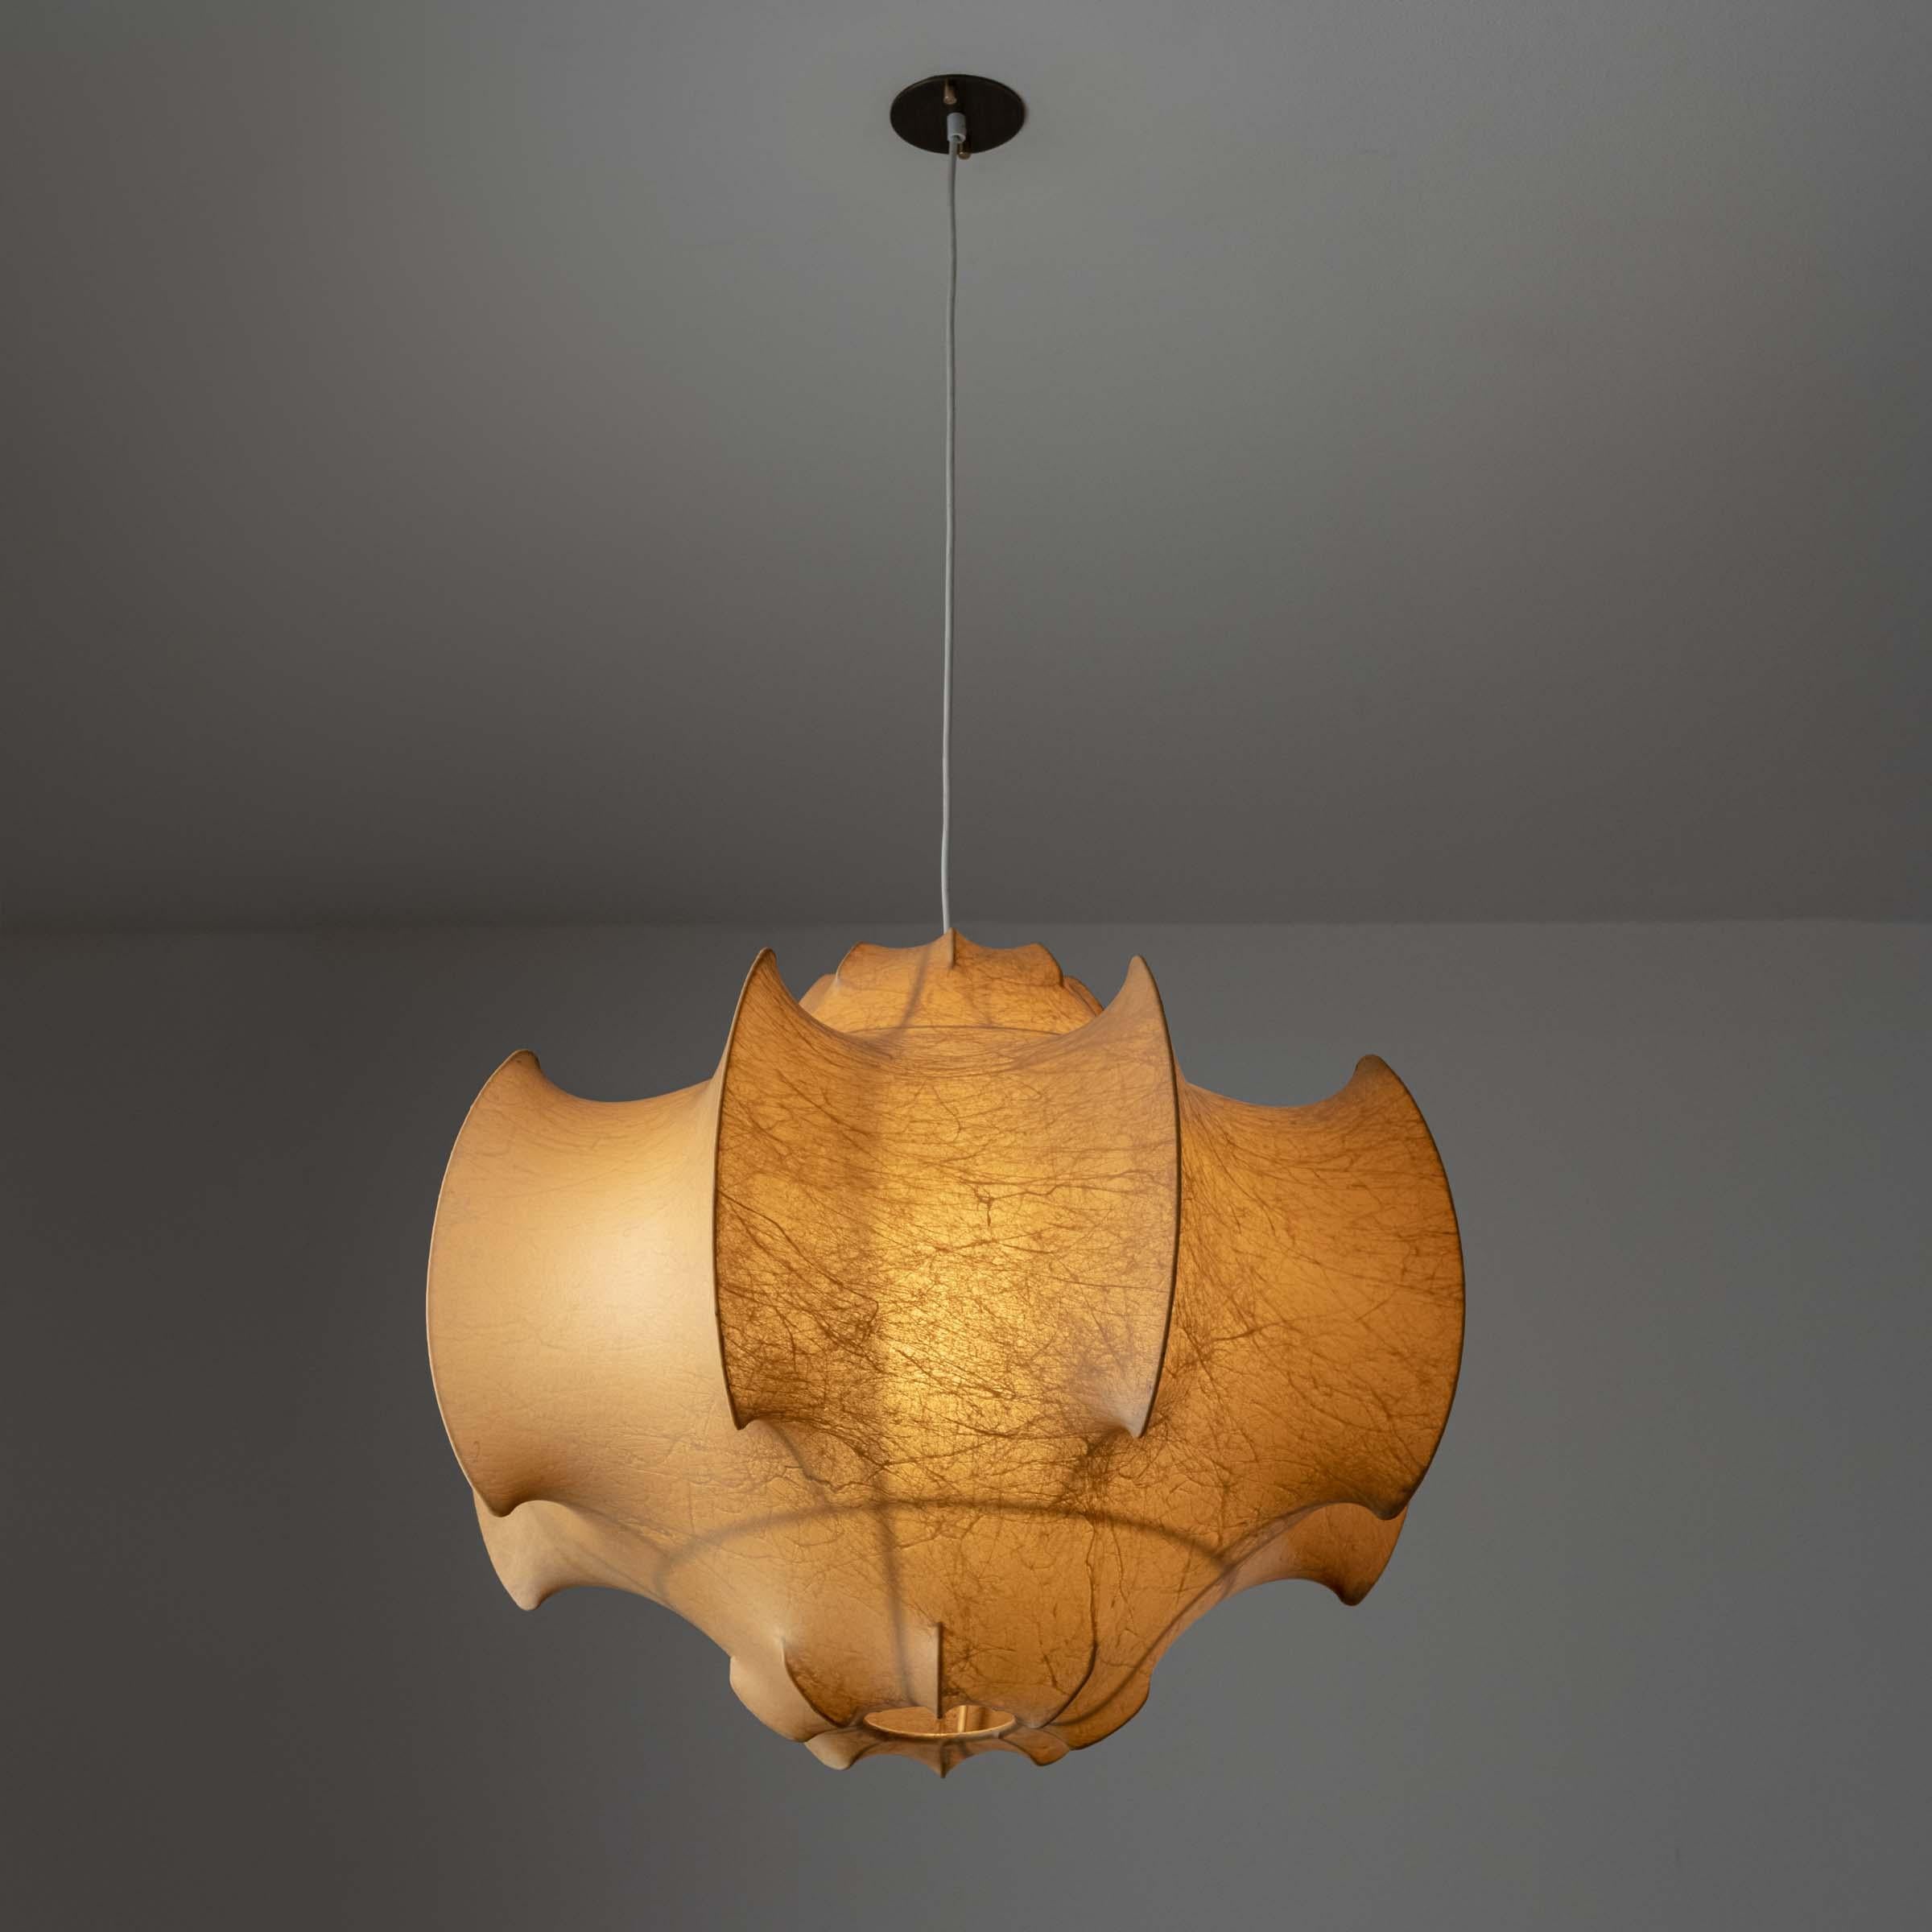 First edition Viscontea suspension light by Achille & Pier Castiglioni for Flos. Designed and manufactured in Italy, circa 1960's. Resin, steel, custom brass backplate. Wired for U.S. standards. We recommend one E27 60w maximum bulb. Bulb not